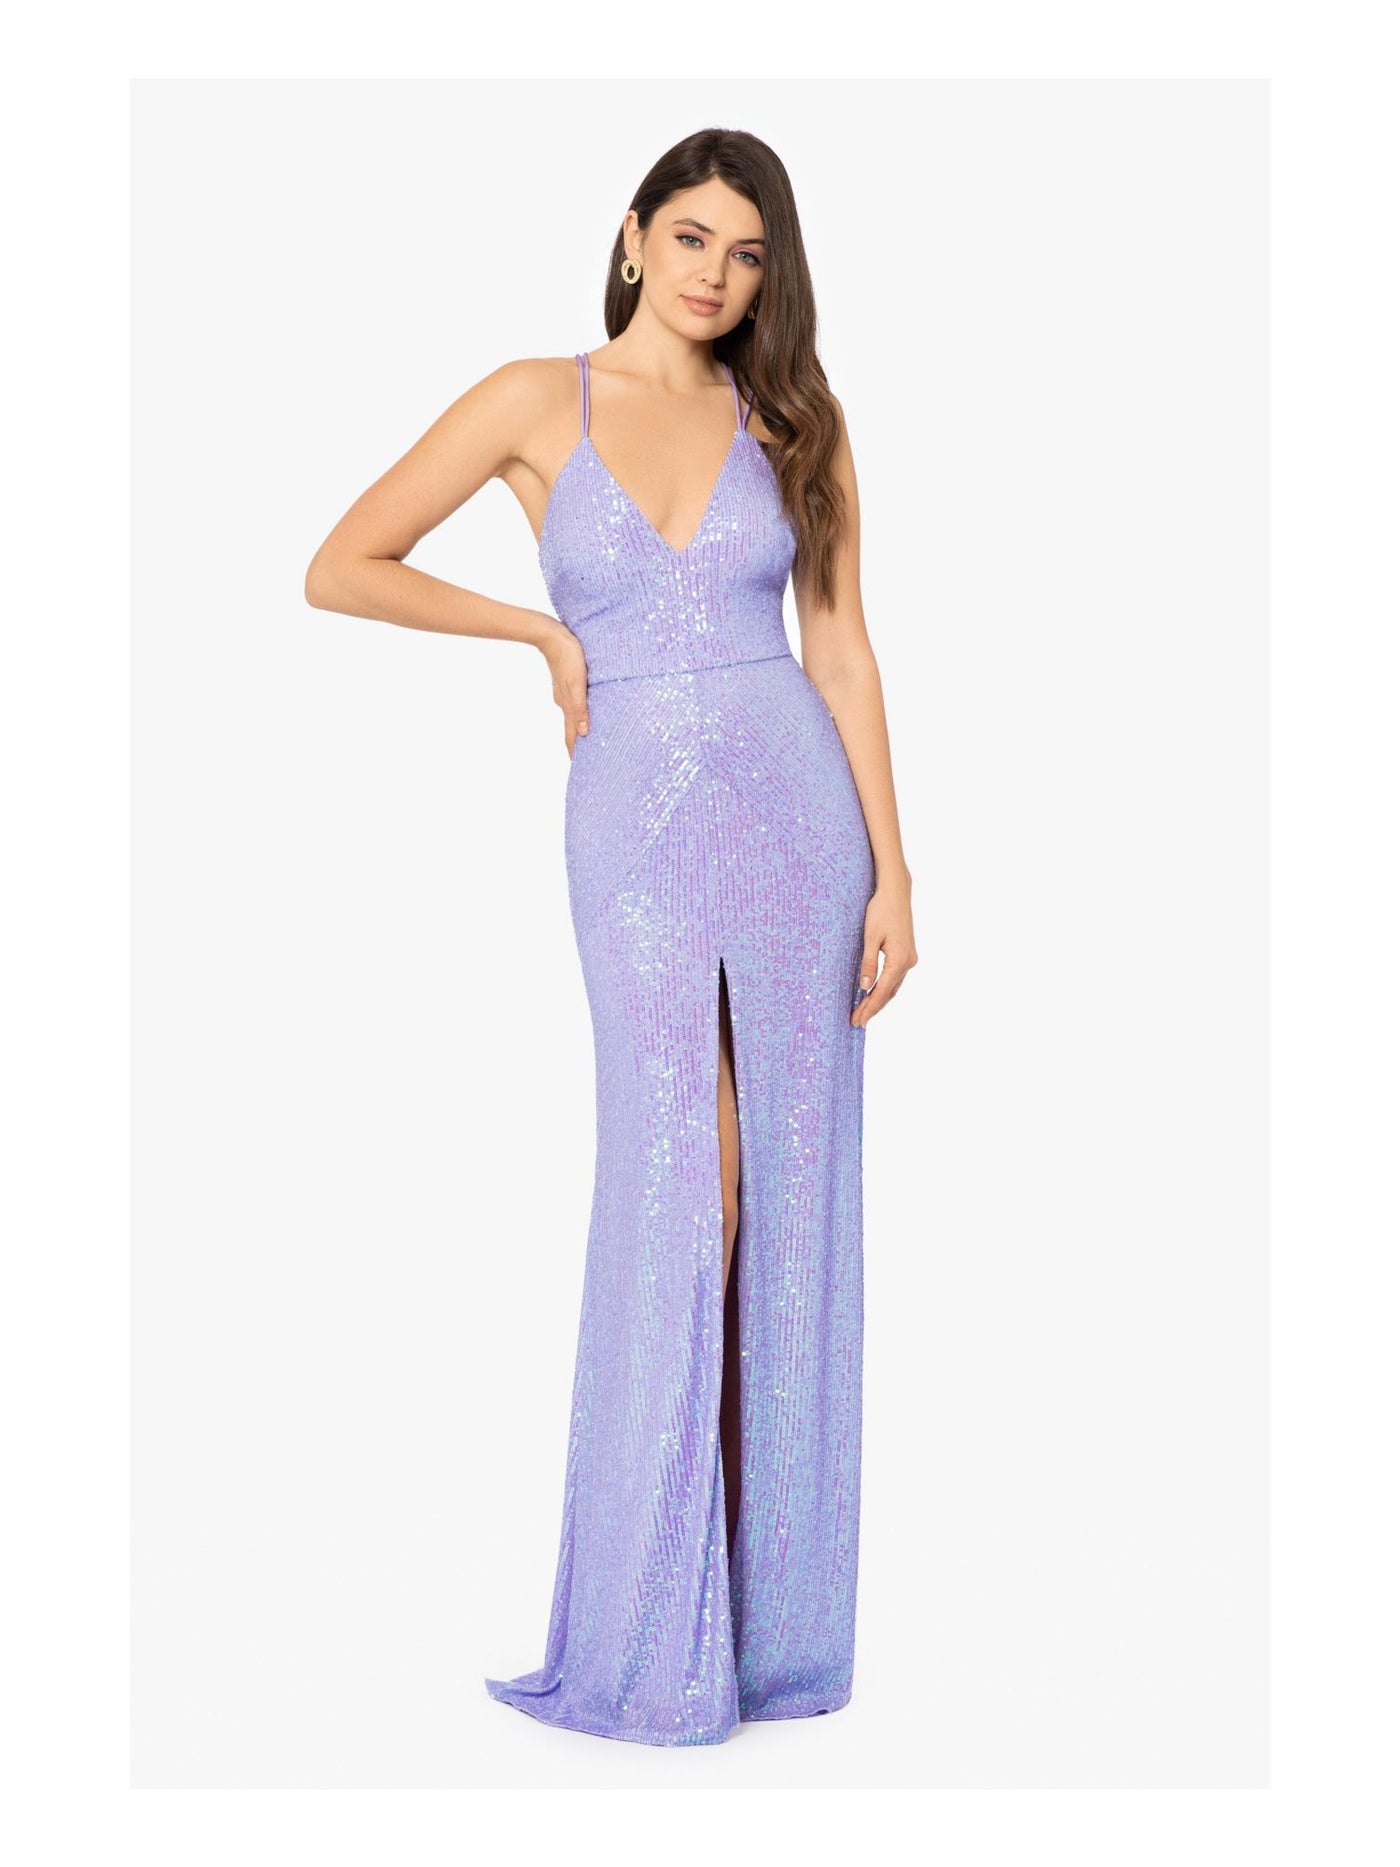 BLONDIE NITES Womens Purple Sequined Zippered Slitted Lined Sleeveless V Neck Full-Length Cocktail Gown Dress Juniors 7